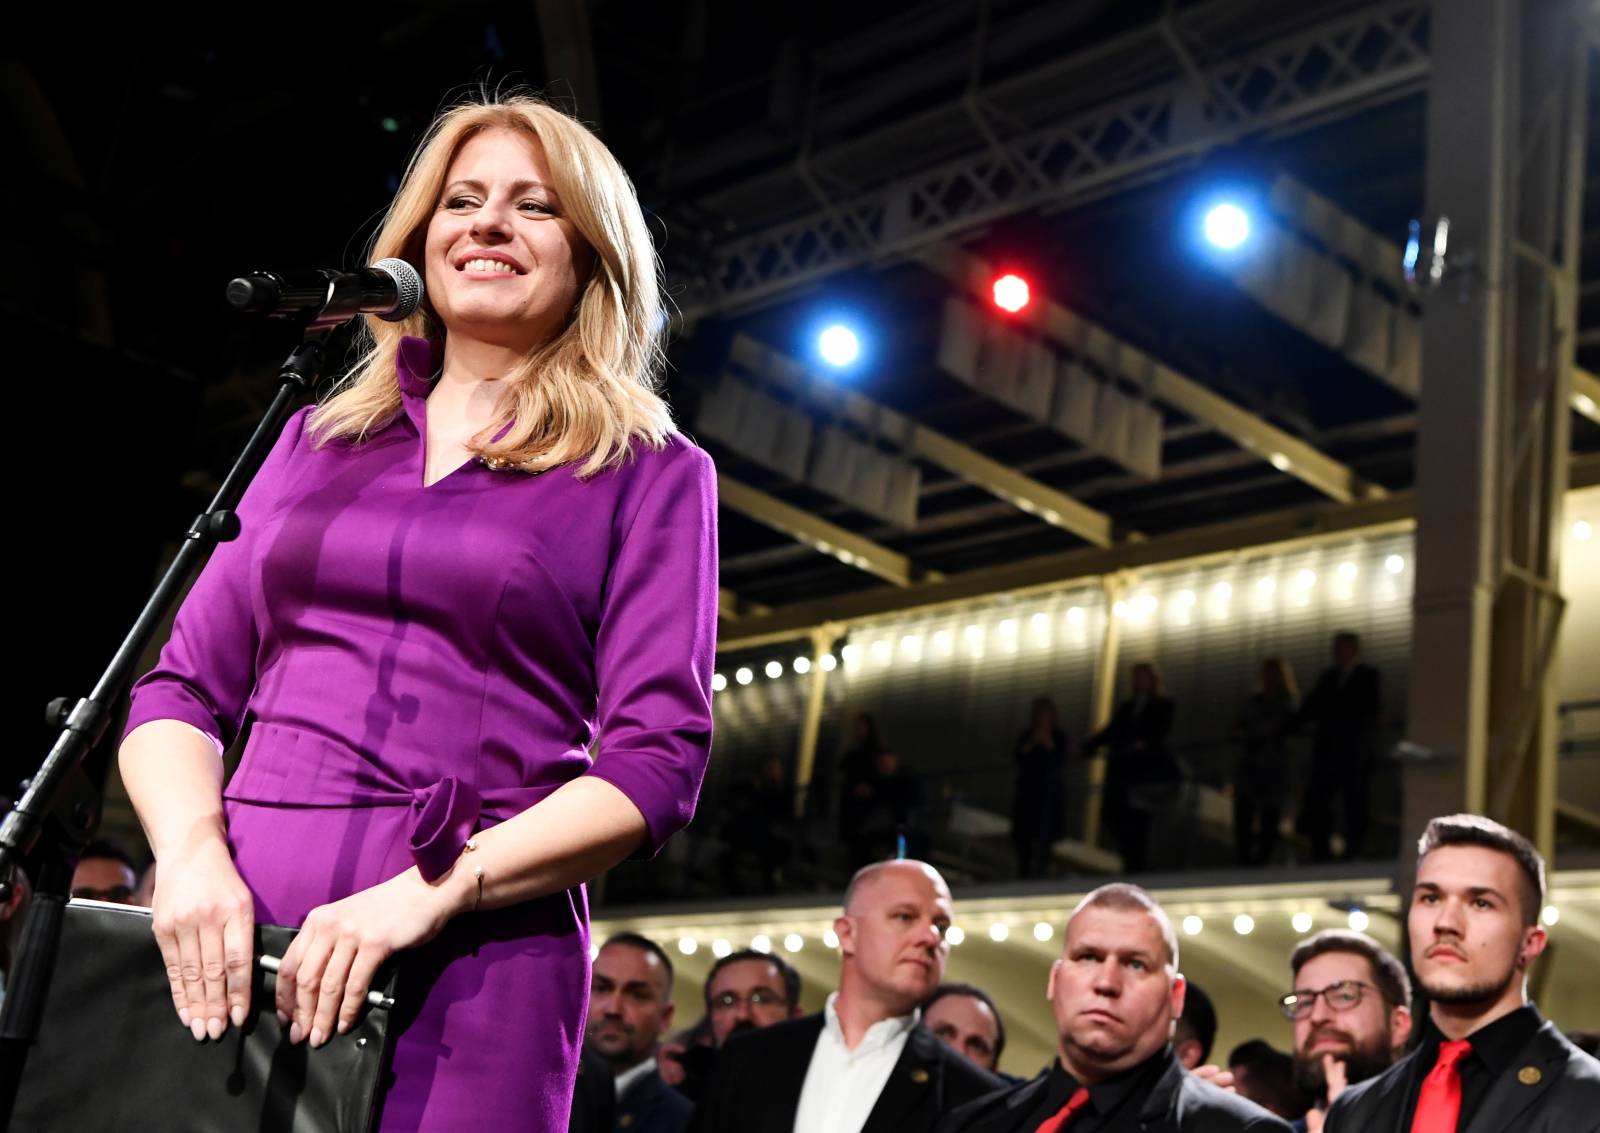 Slovakia's presidential candidate Zuzana Caputova speaks after winning the presidential election, at her party's headquarters in Bratislava